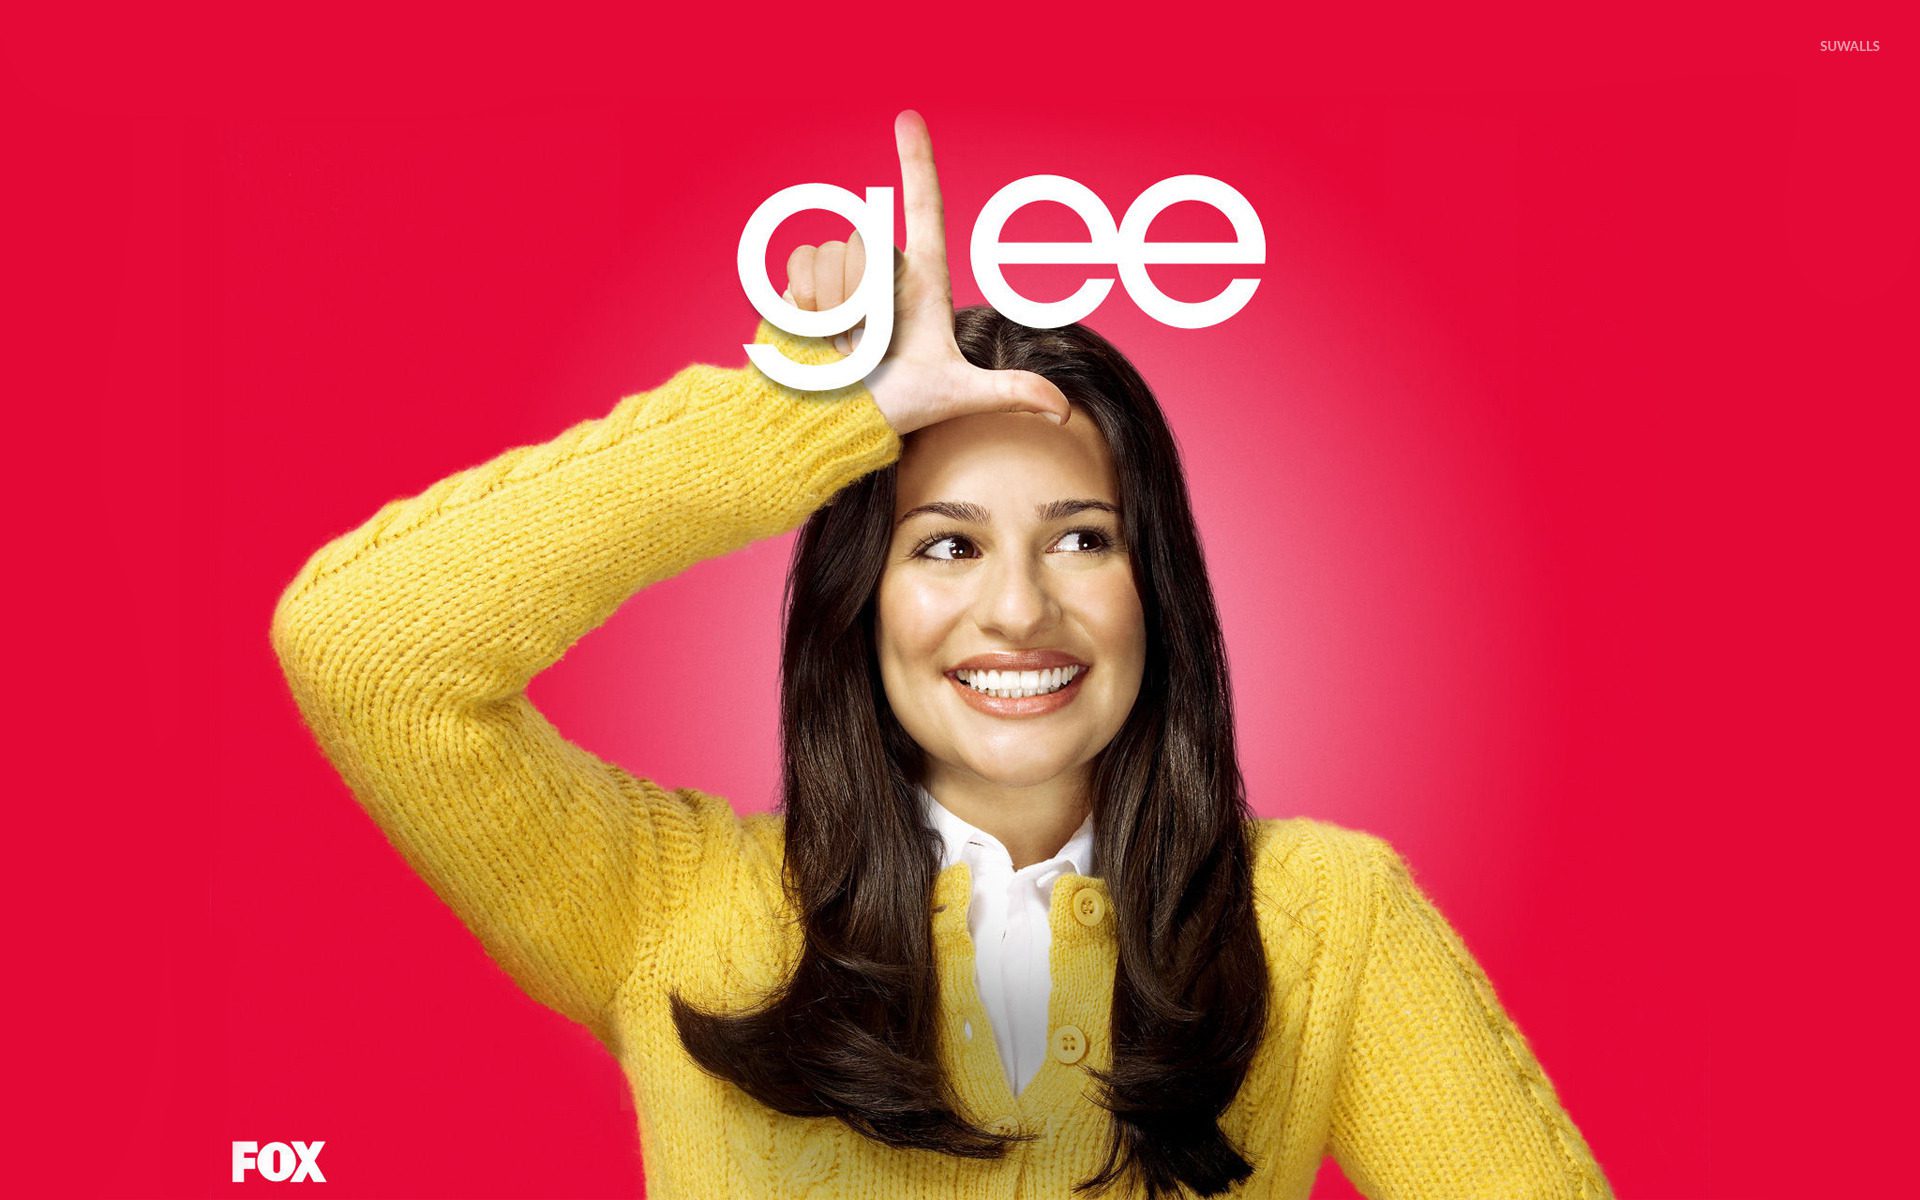 Who Does Rachel End Up With In Glee